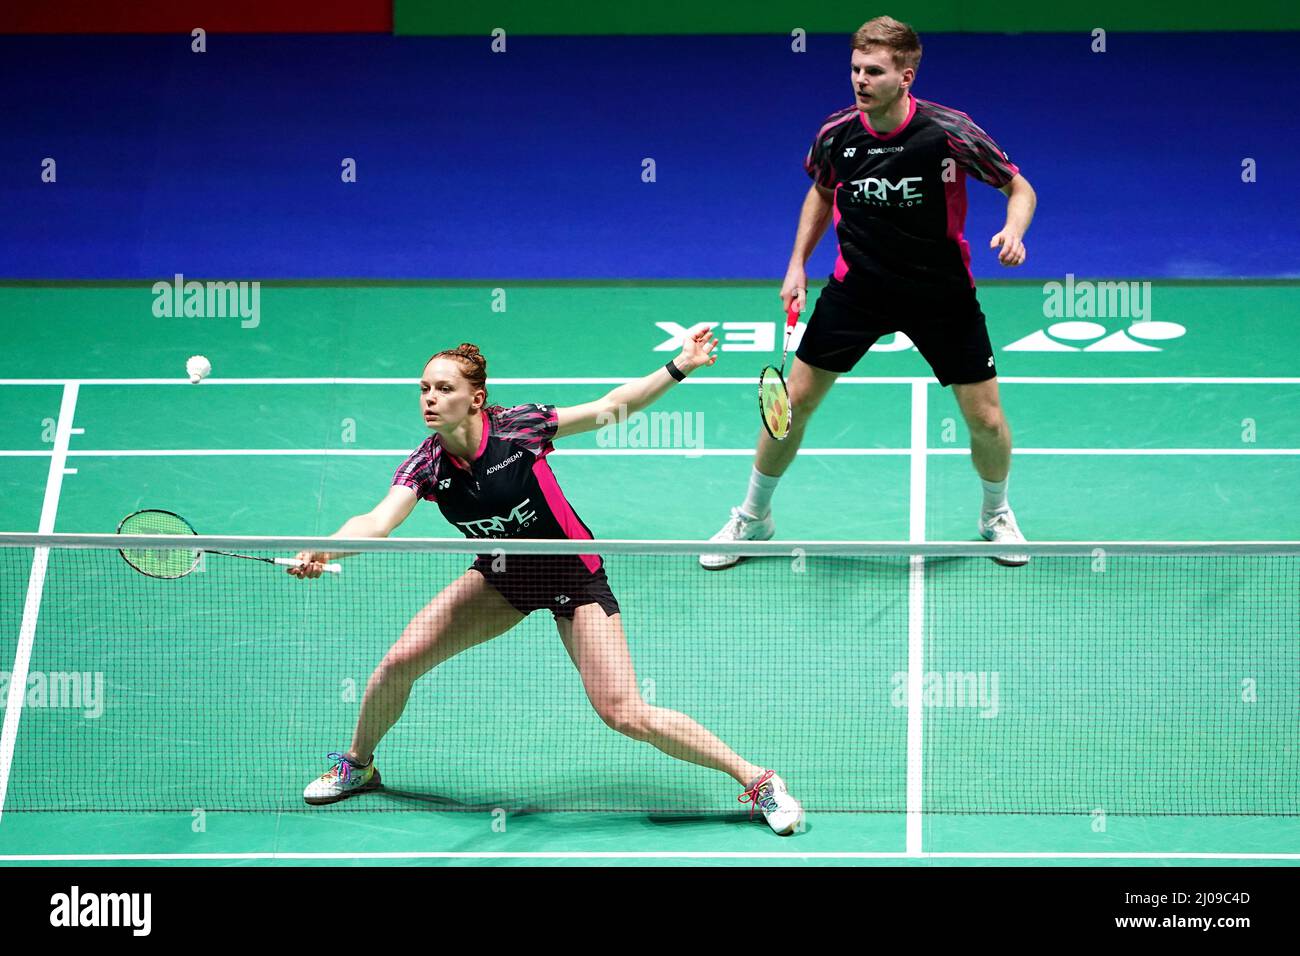 England's Marcus Ellis and Lauren Smith (left) in action against Japan's Yuki Kaneko and Misaki Matsutomo during day two of the YONEX All England Open Badminton Championships at the Utilita Arena Birmingham. Picture date: Thursday March 17, 2022. Stock Photo